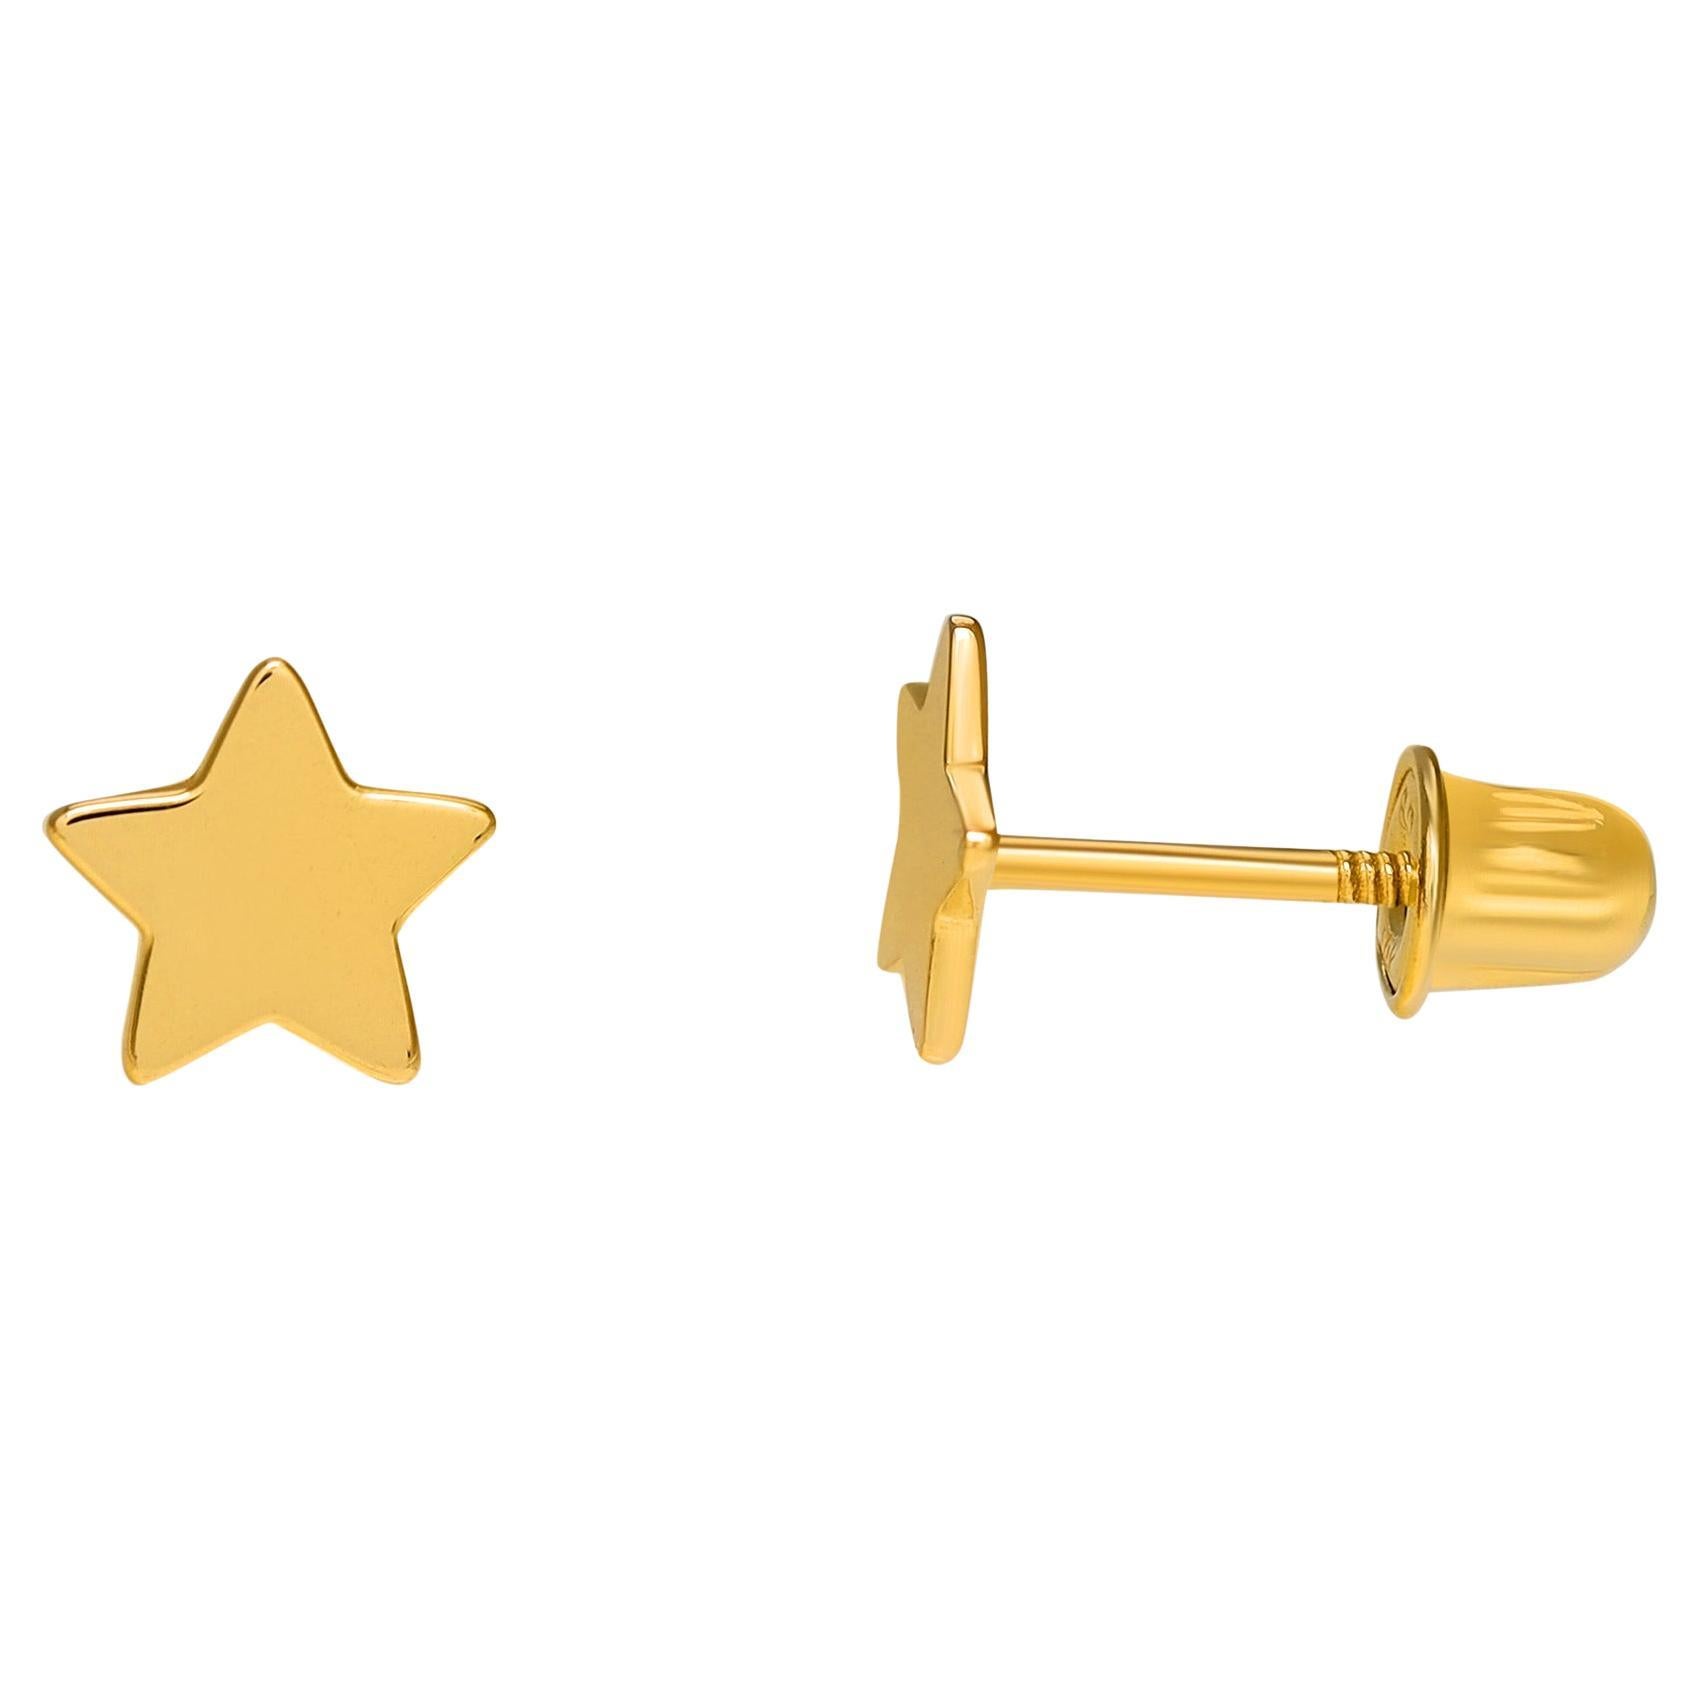 This fun and dainty celestial symbol is an easy and perfect everyday stud. Crafted in highly polished 14K yellow gold. Earring size: 5.3mm approx. Secured with screw back posts. Total weight: 0.43 grams. Makes a great gift for kids and grownups.